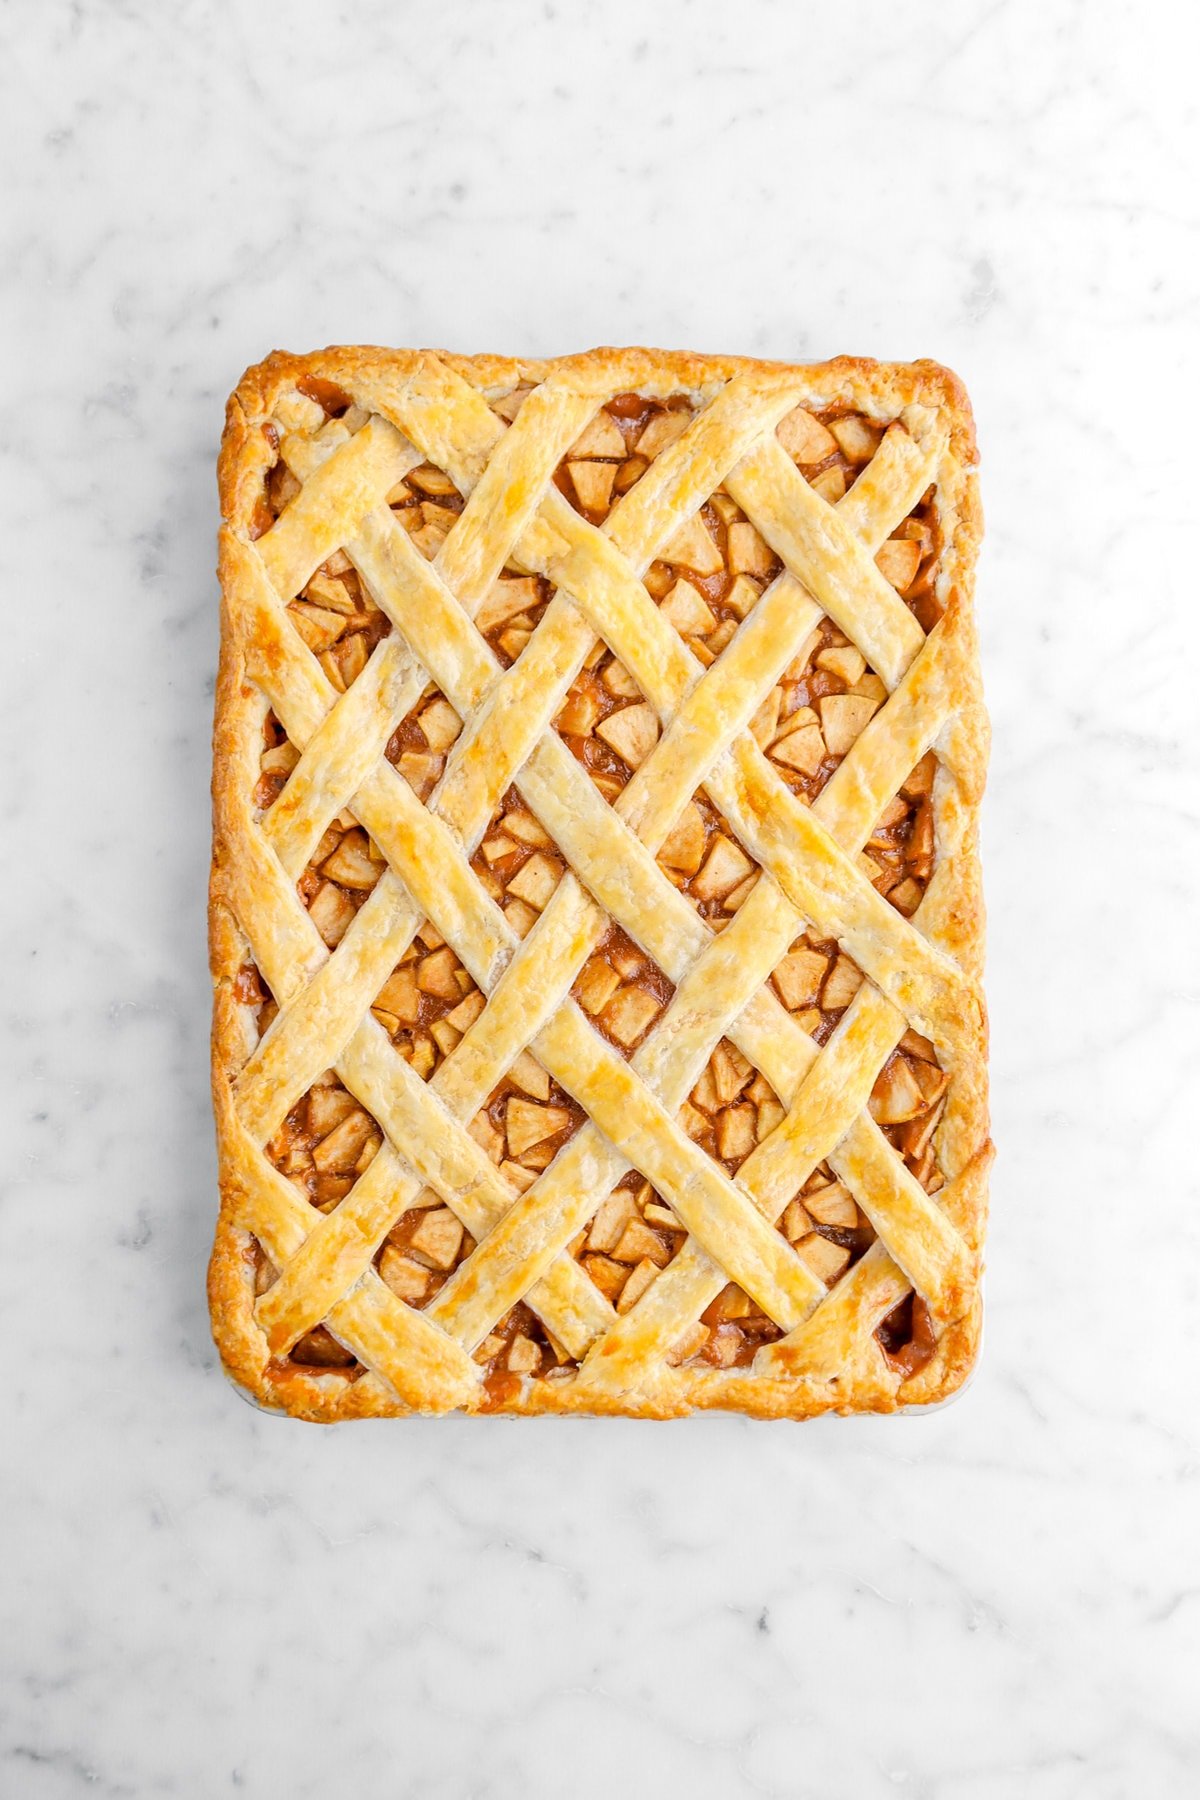 baked apple slab pie on marble surface with lattice top.